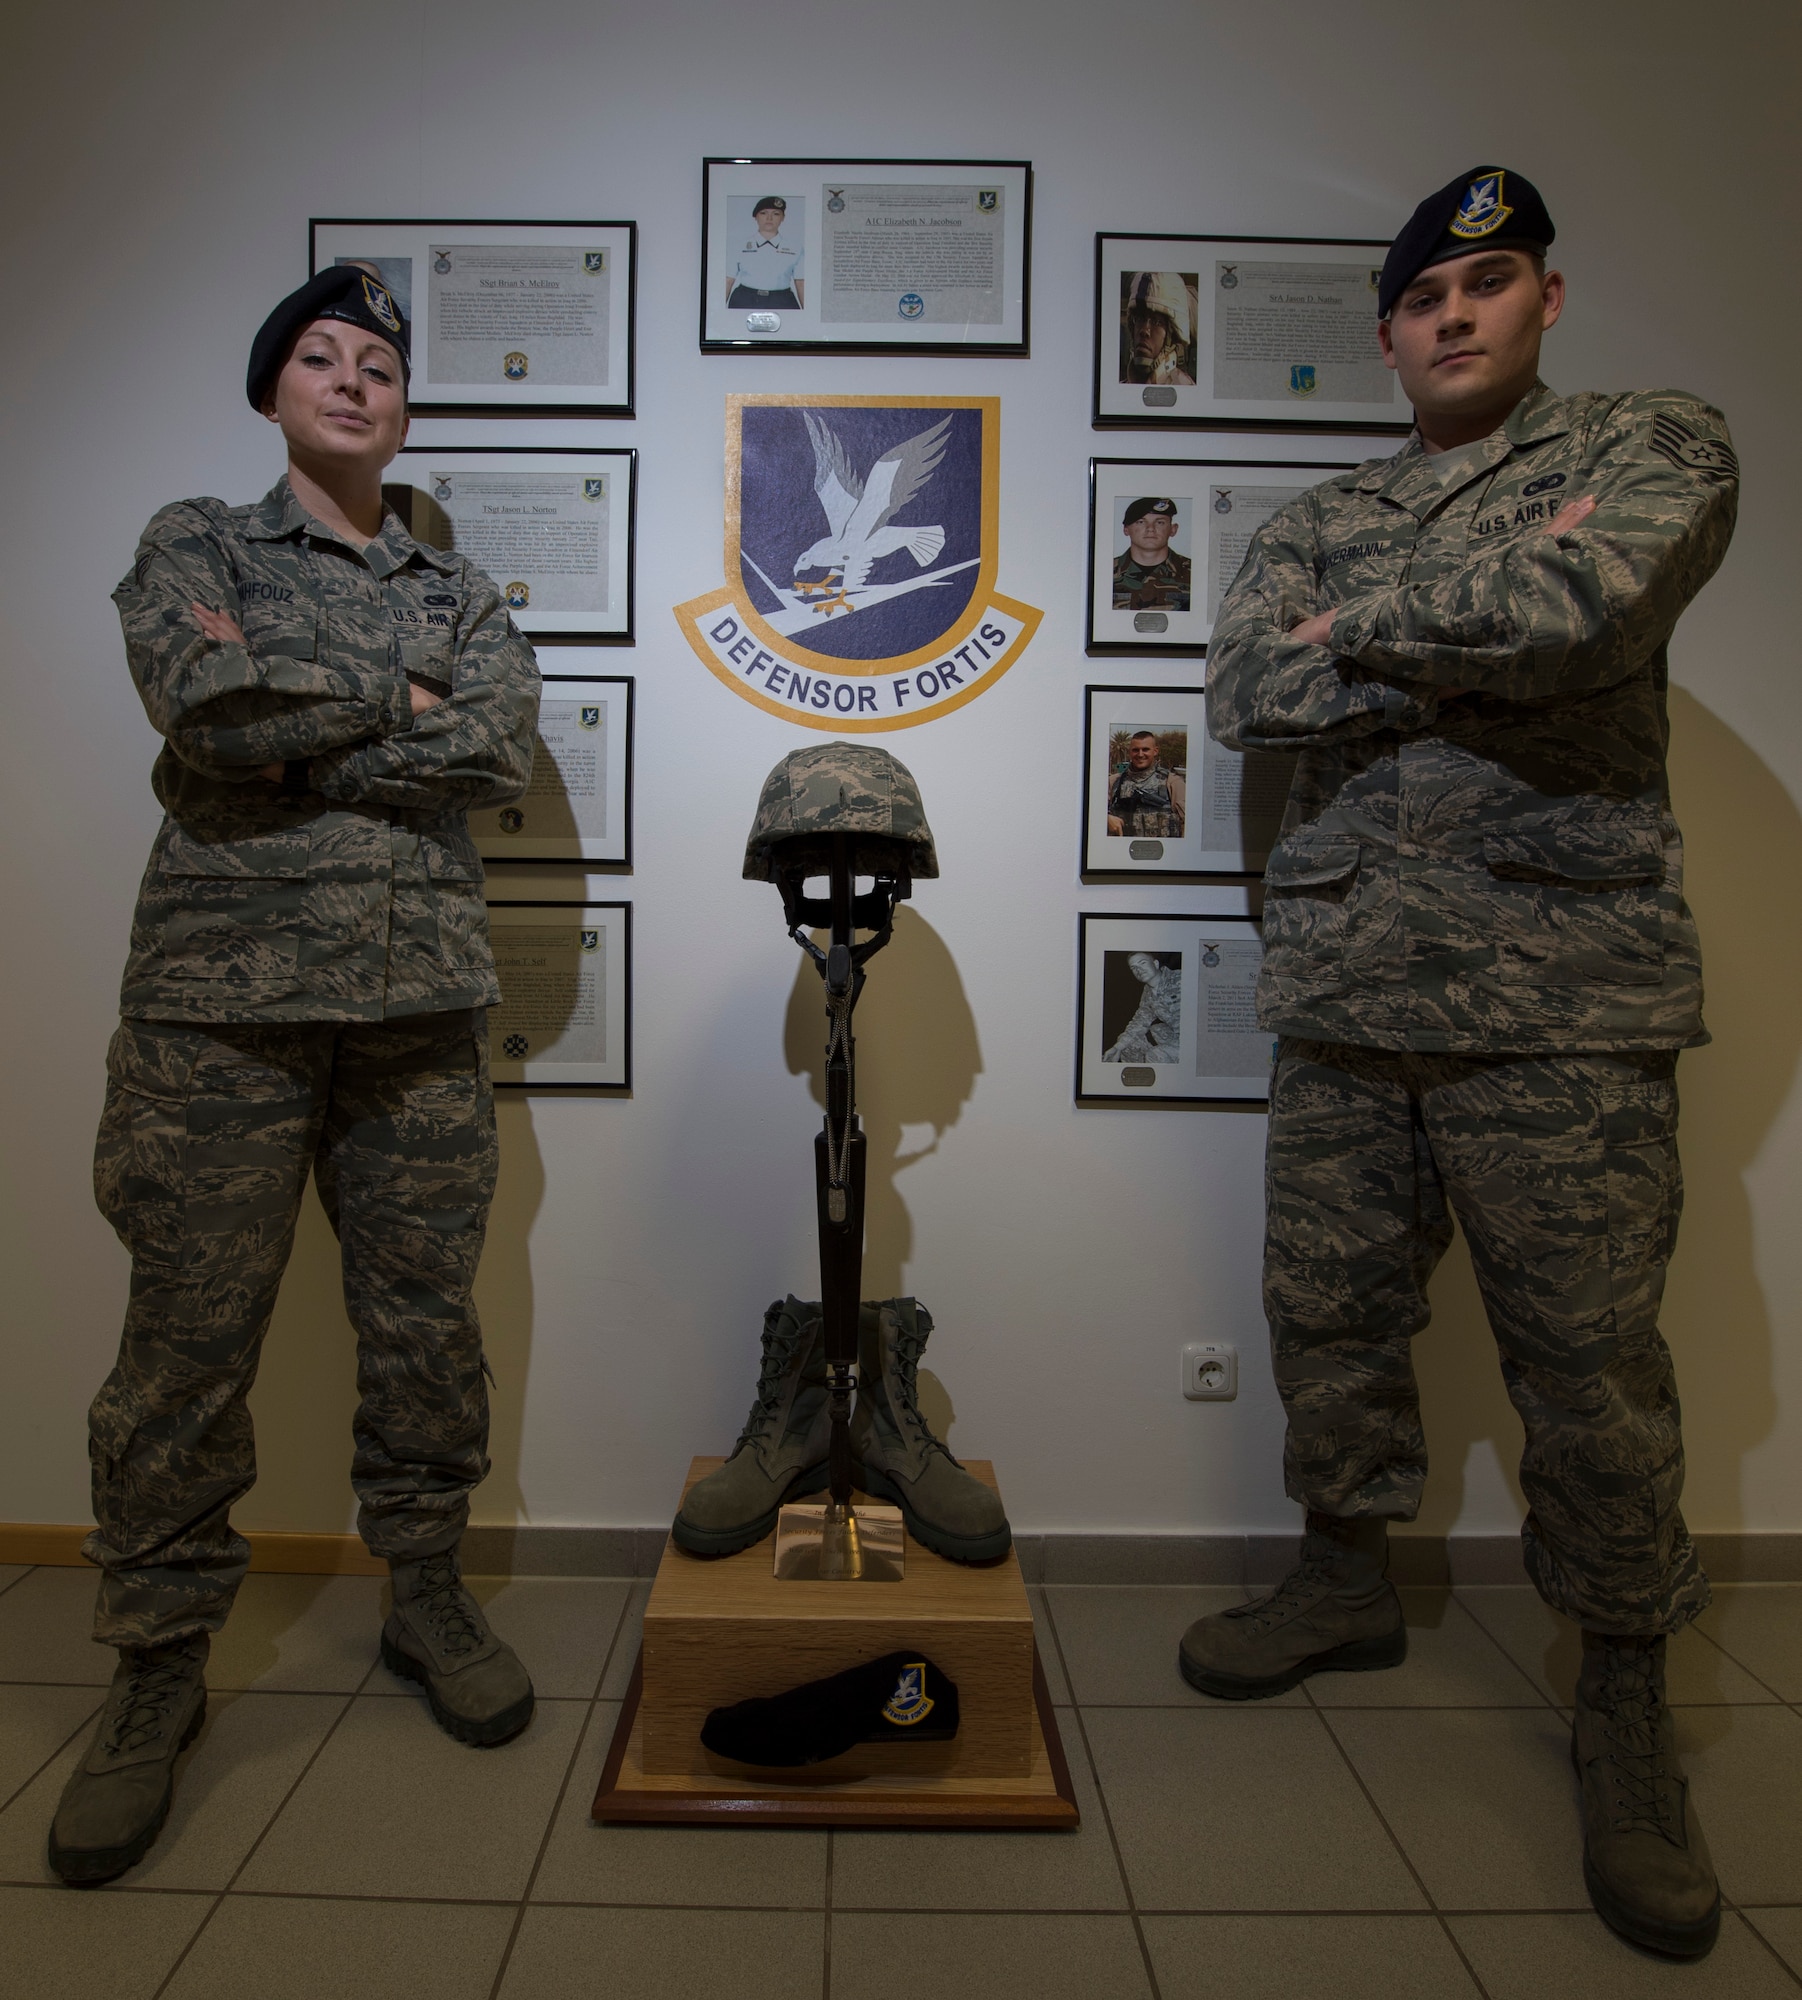 SPANDGDAHLEM AIR BASE, Germany -- U.S. Air Force Senior Airman Lindsey Mahfouz, left, 52nd Security Forces Squadron member from Lincoln, Calif., and Staff Sgt. Robert Ackerman, 52nd SFS member from Long Island, N.Y., stand in front of the 52nd SFS Fallen Defenders Memorial after putting it together March 1, 2013. Mahfouz worked with Ackerman to find information about the nine fallen security forces members featured in the memorial. (U.S. Air Force photo by Senior Airman Natasha Stannard/Released)